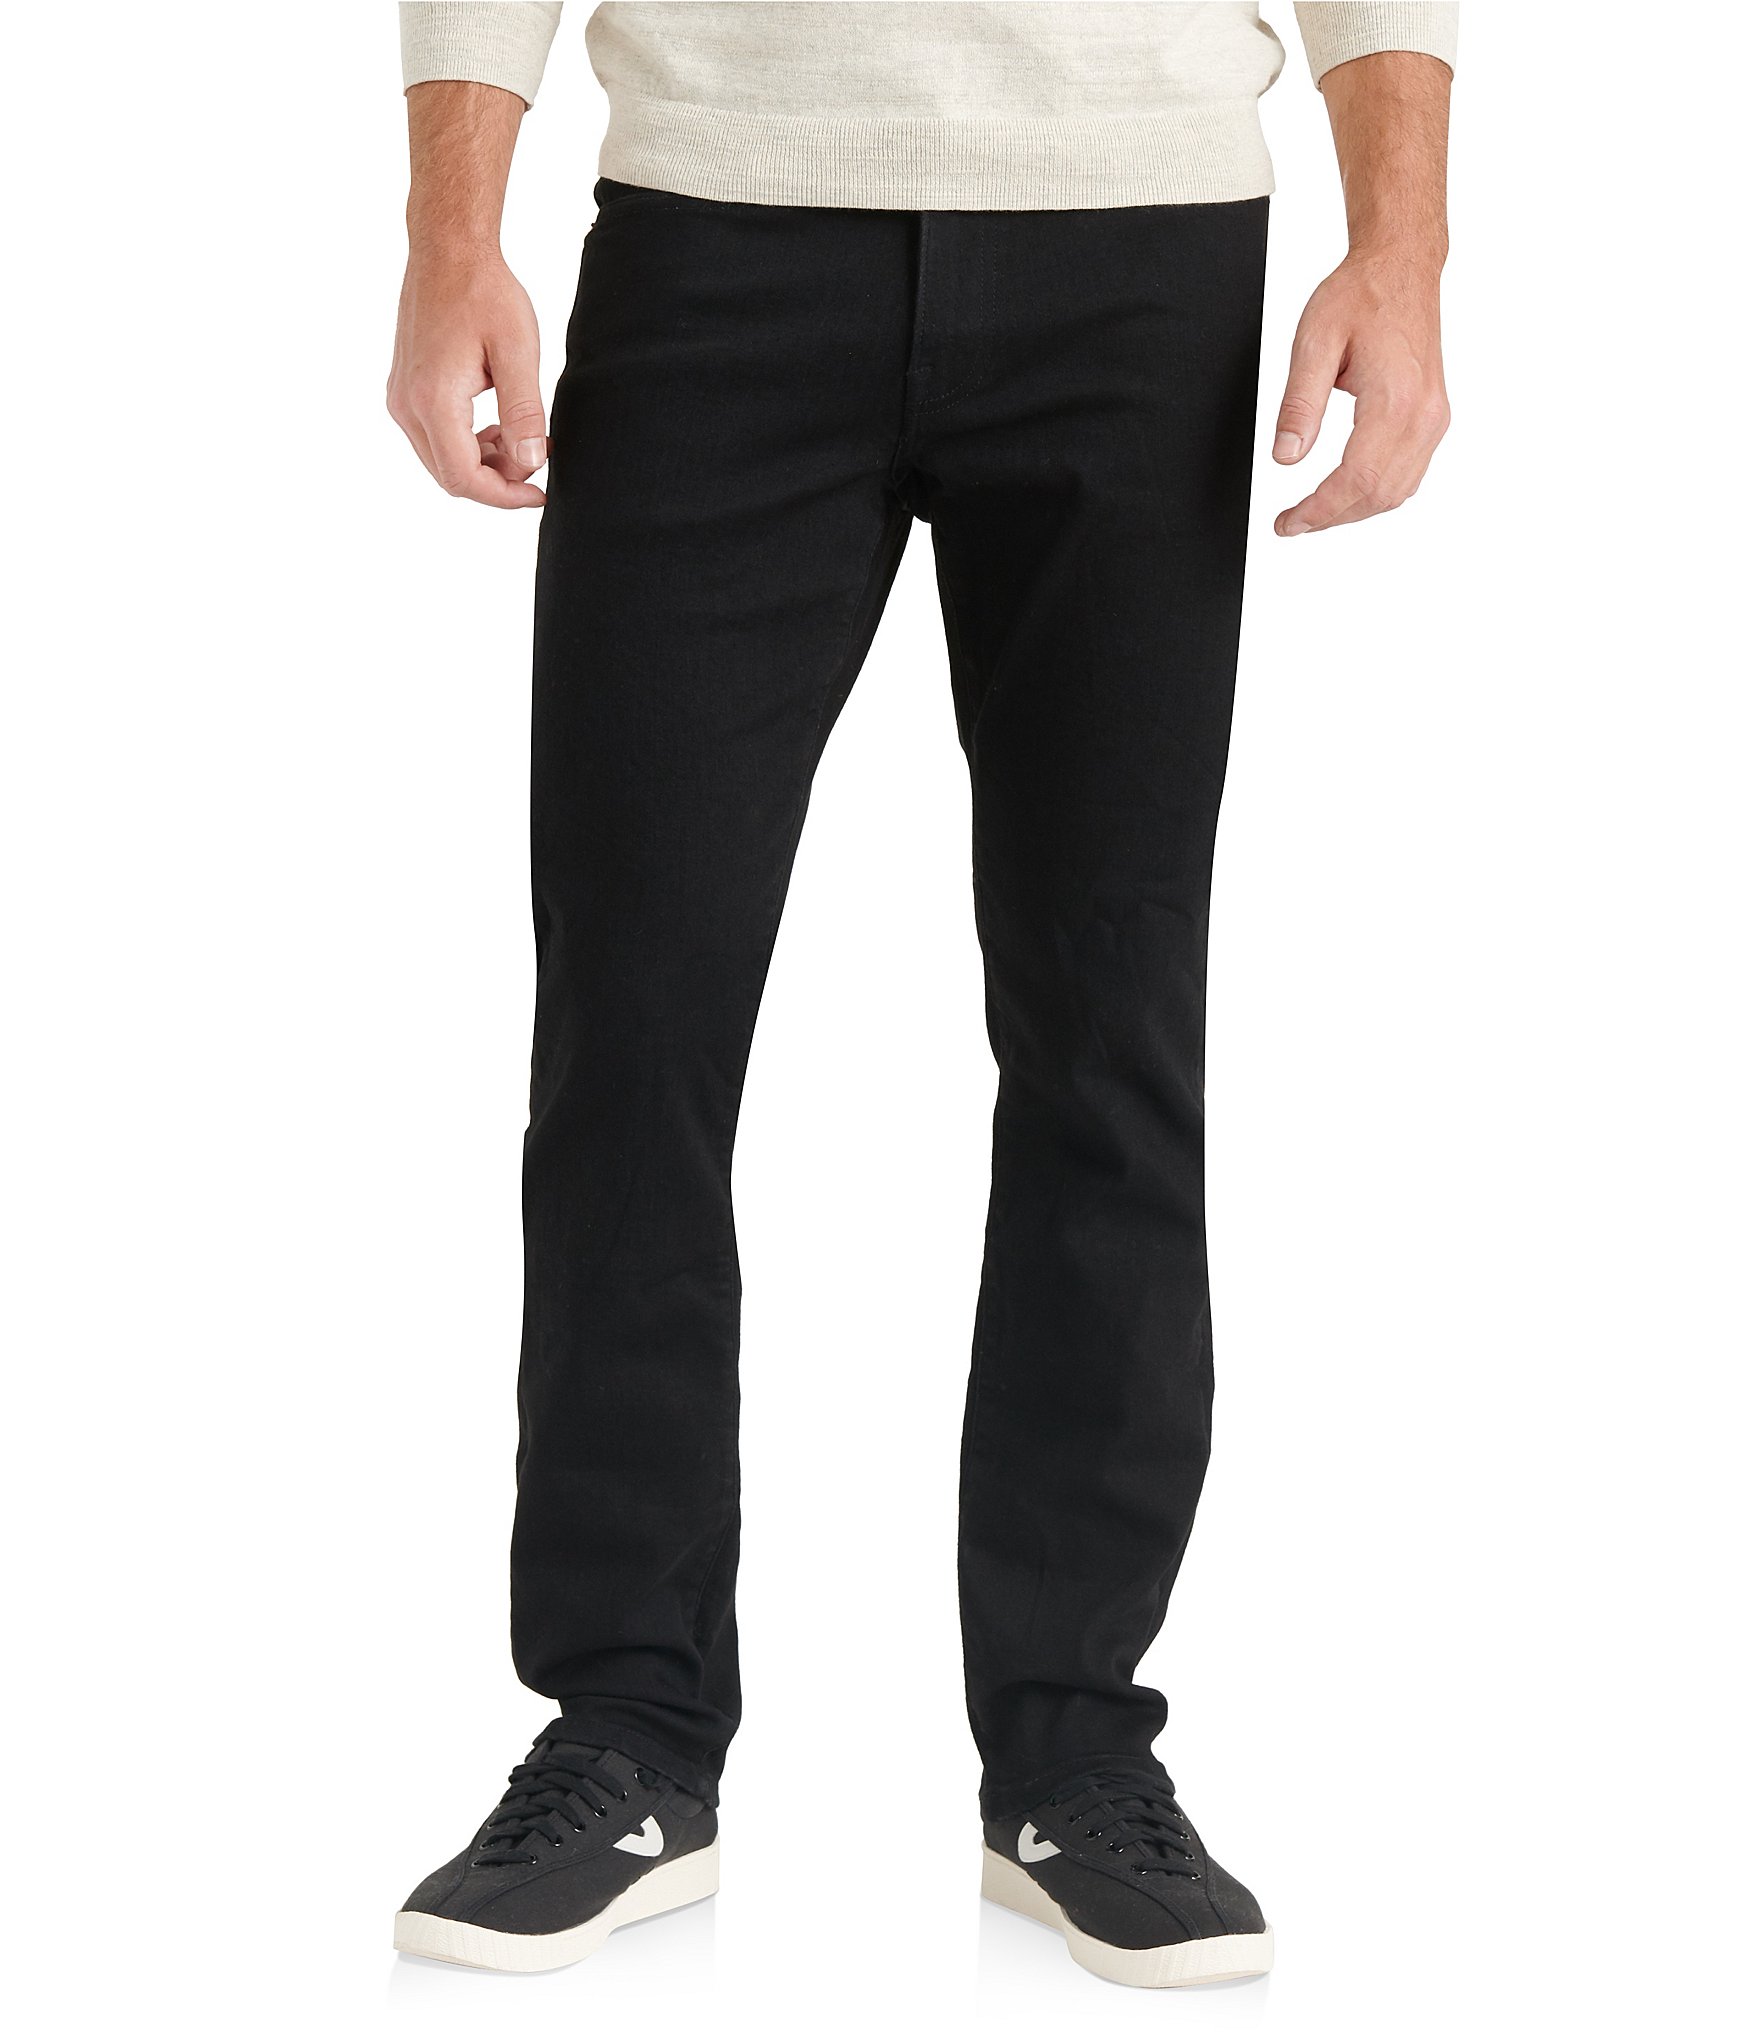 Lucky Brand Black Rinse 410 Athletic Slim Fit Jeans